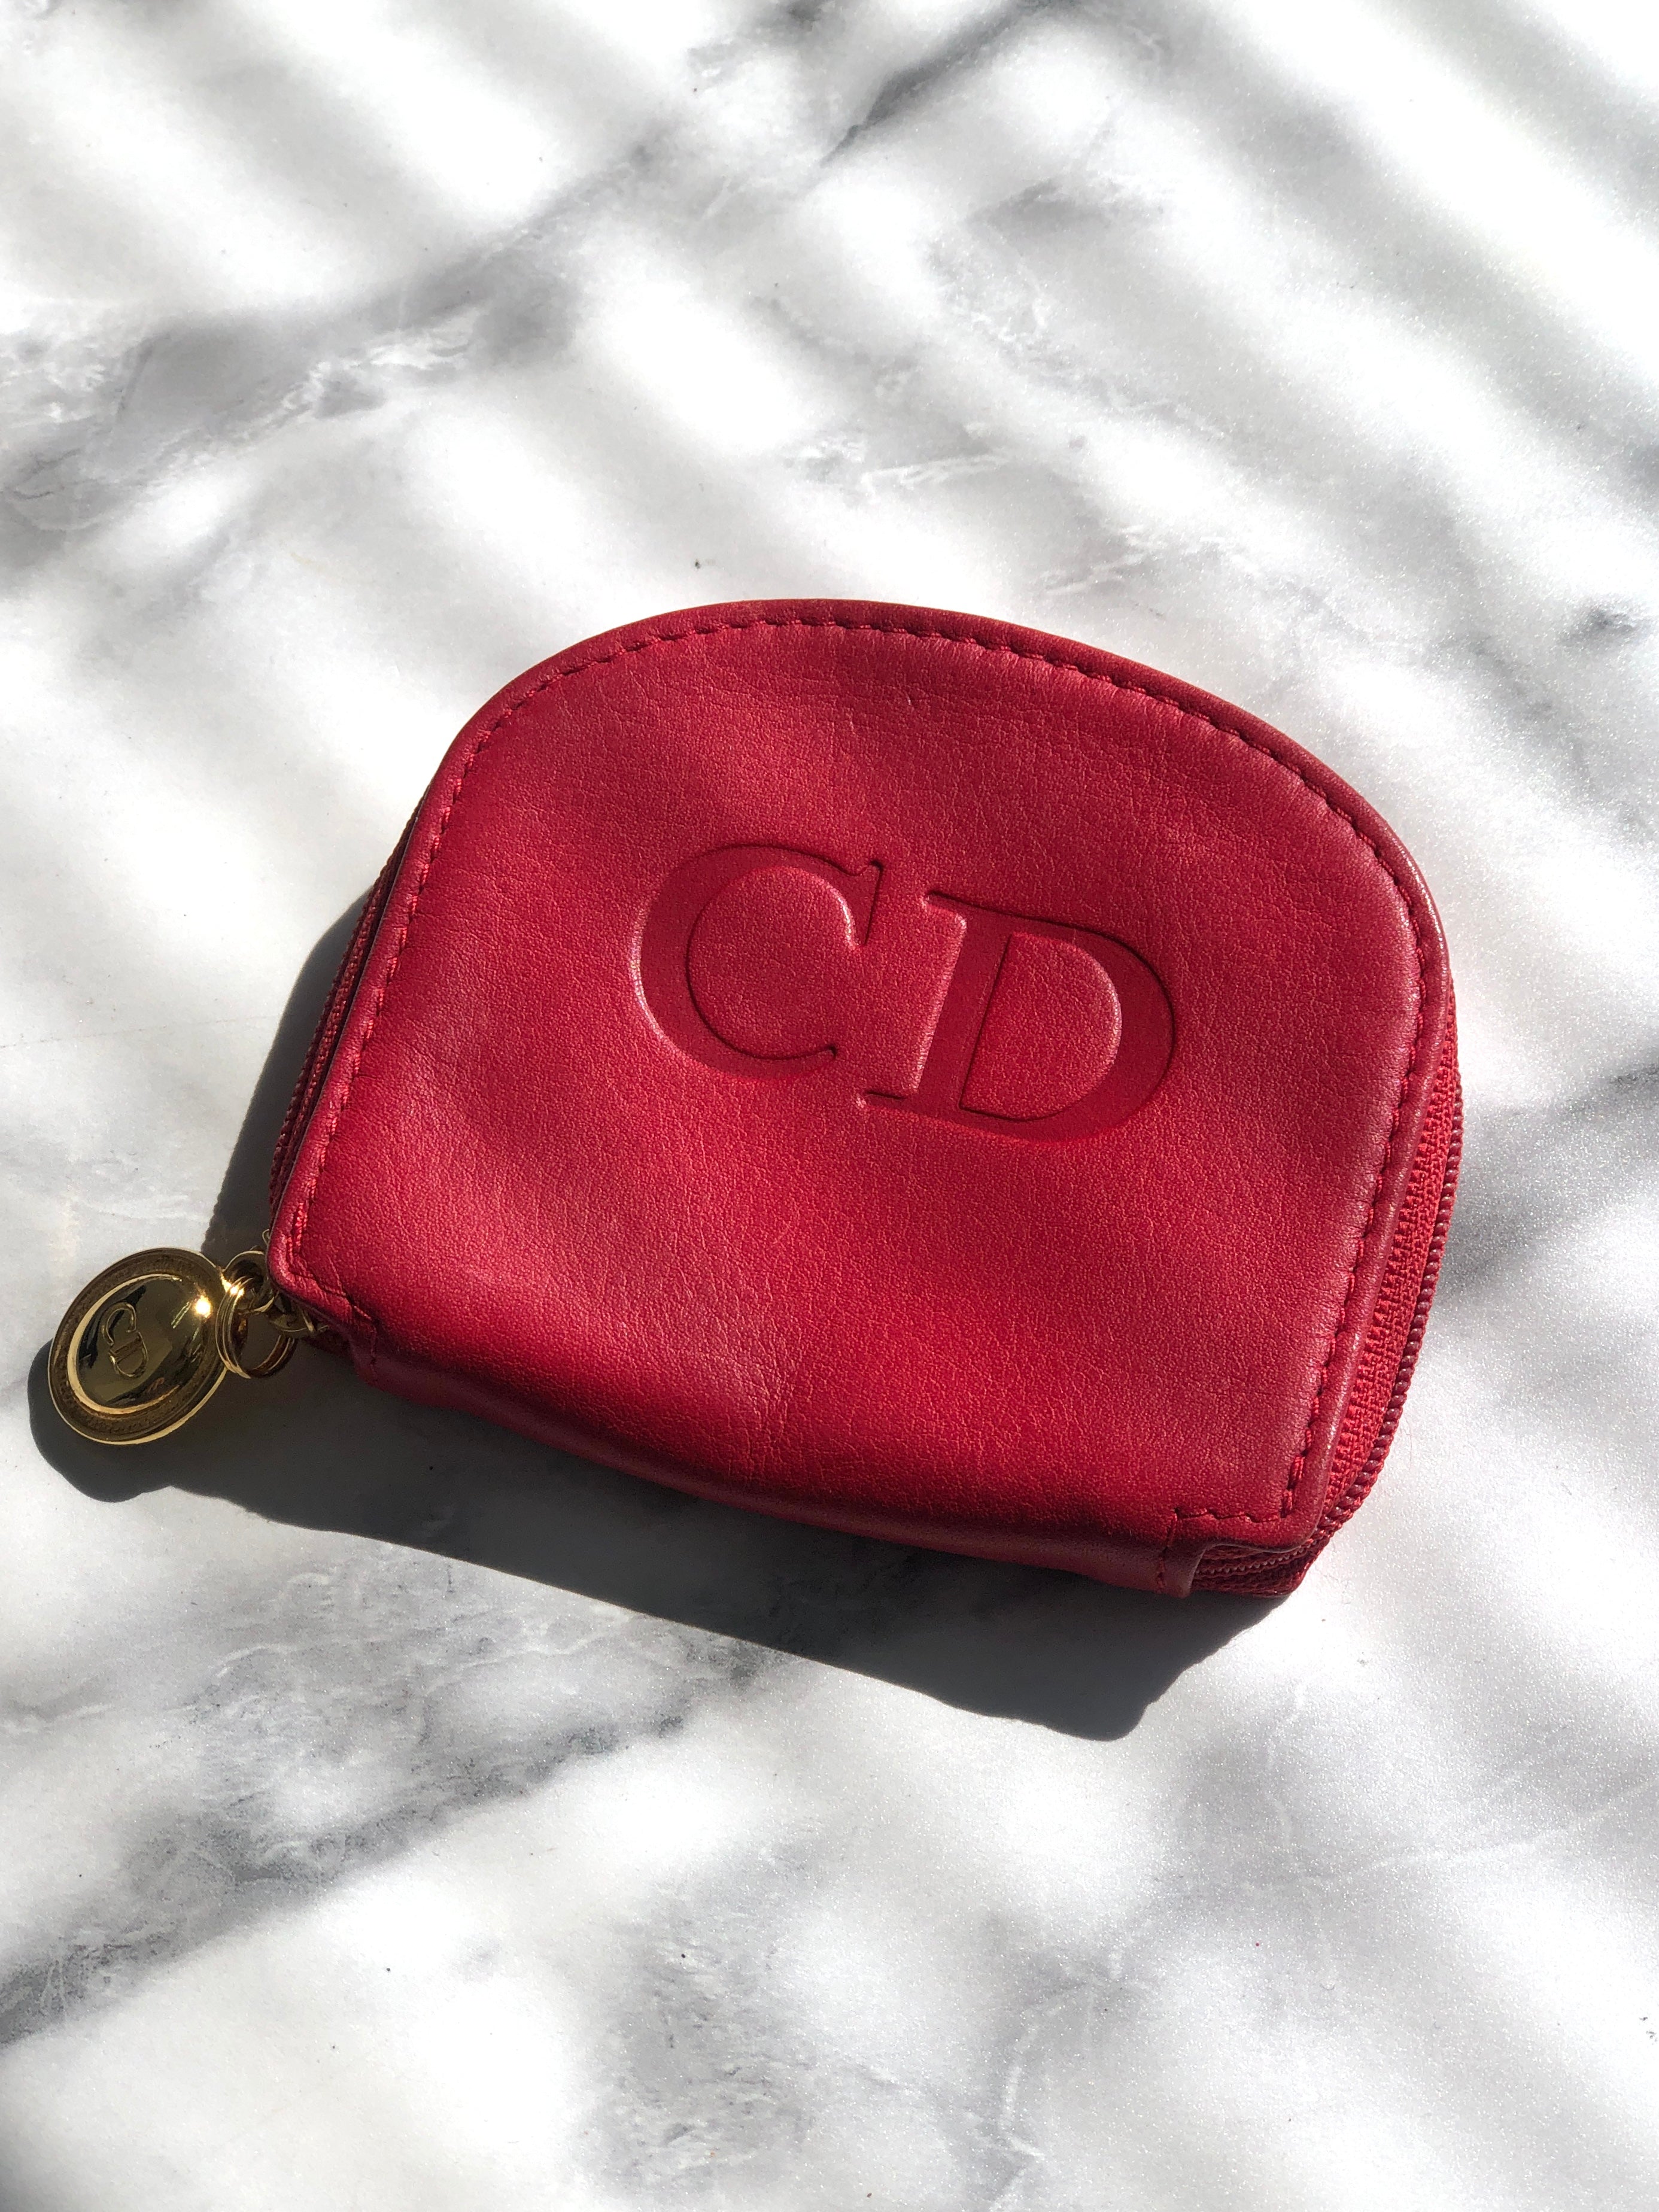 Shop Christian Dior Leather Bags by eDesigner42 | BUYMA